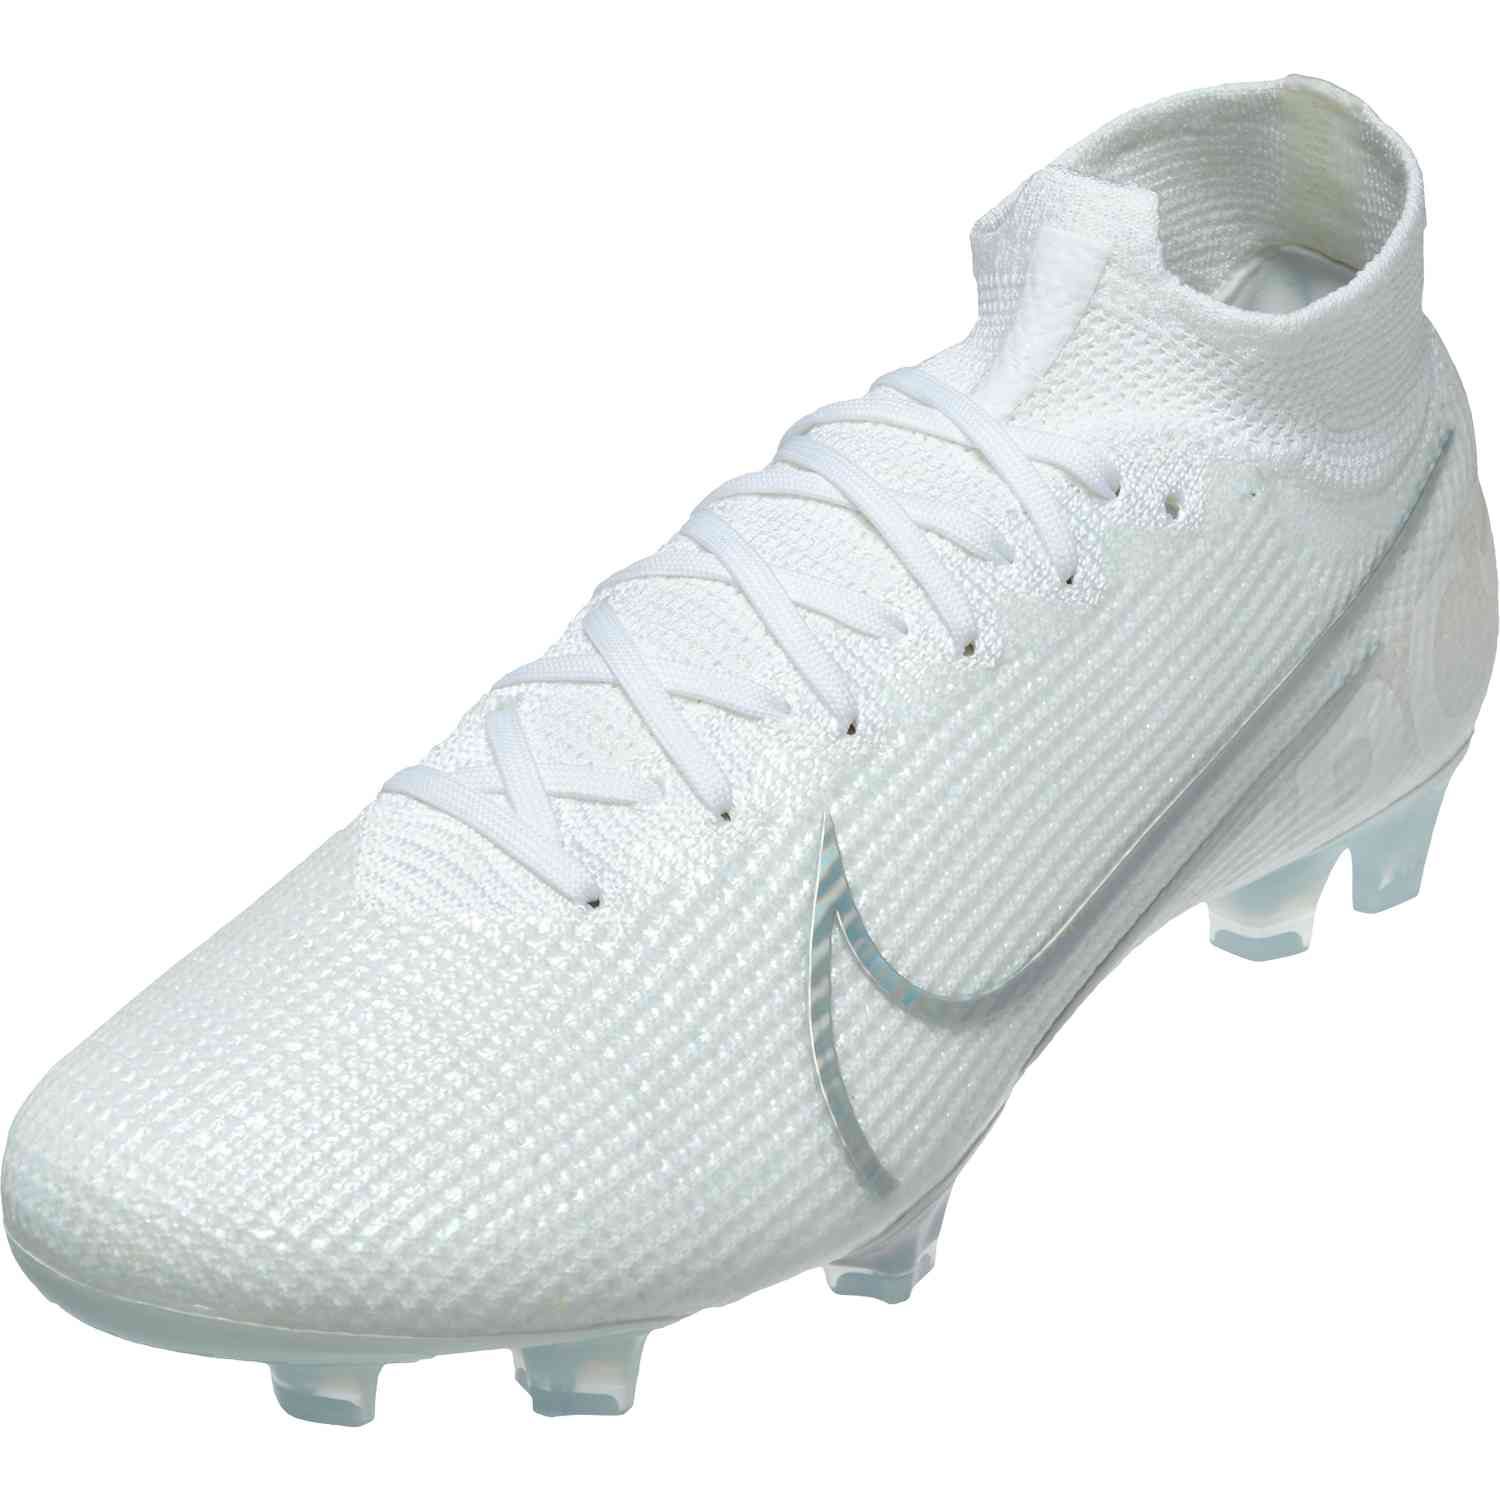 superfly 7 white